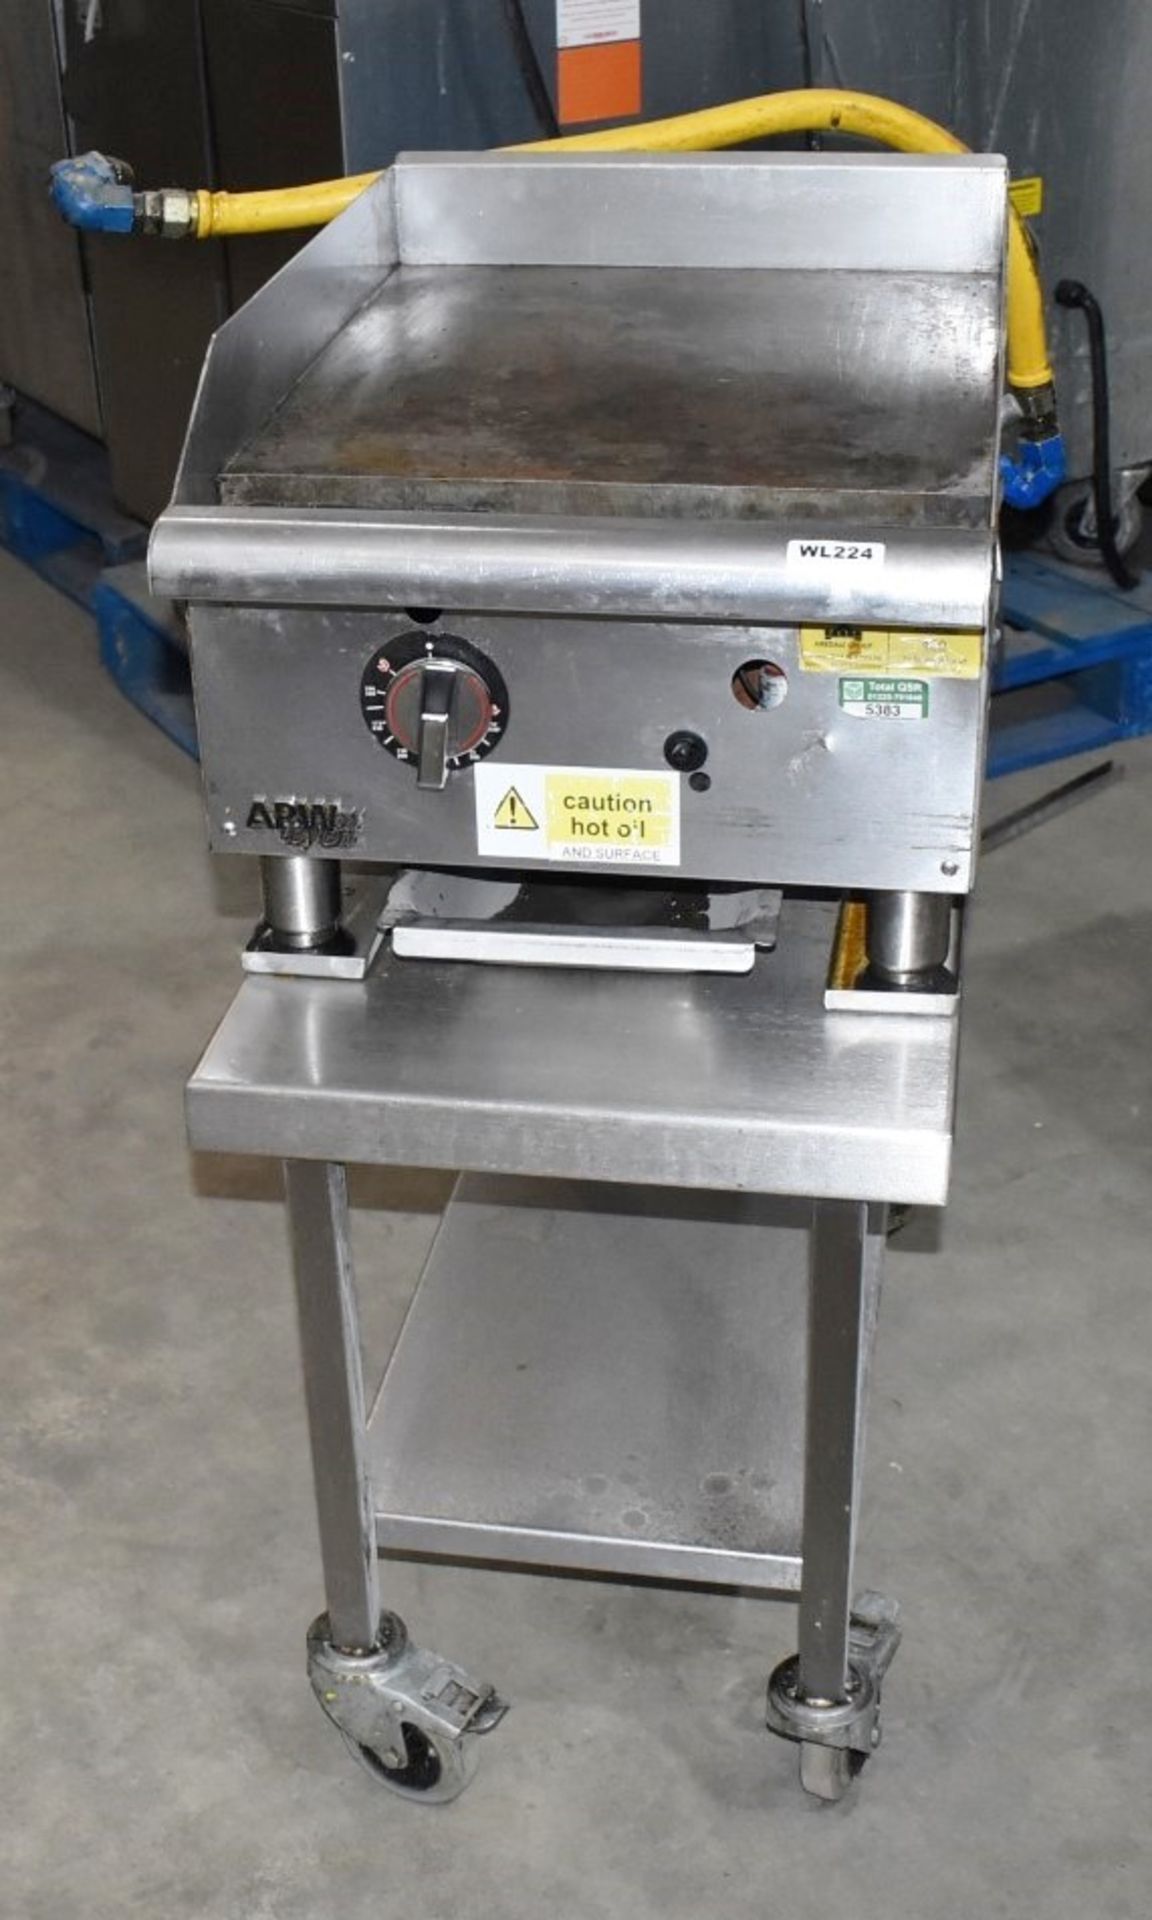 1 x APW Wyott Commercial Solid Top Cooking Griddle With Stand - Gas Powered - Size H99 x W46 x D60